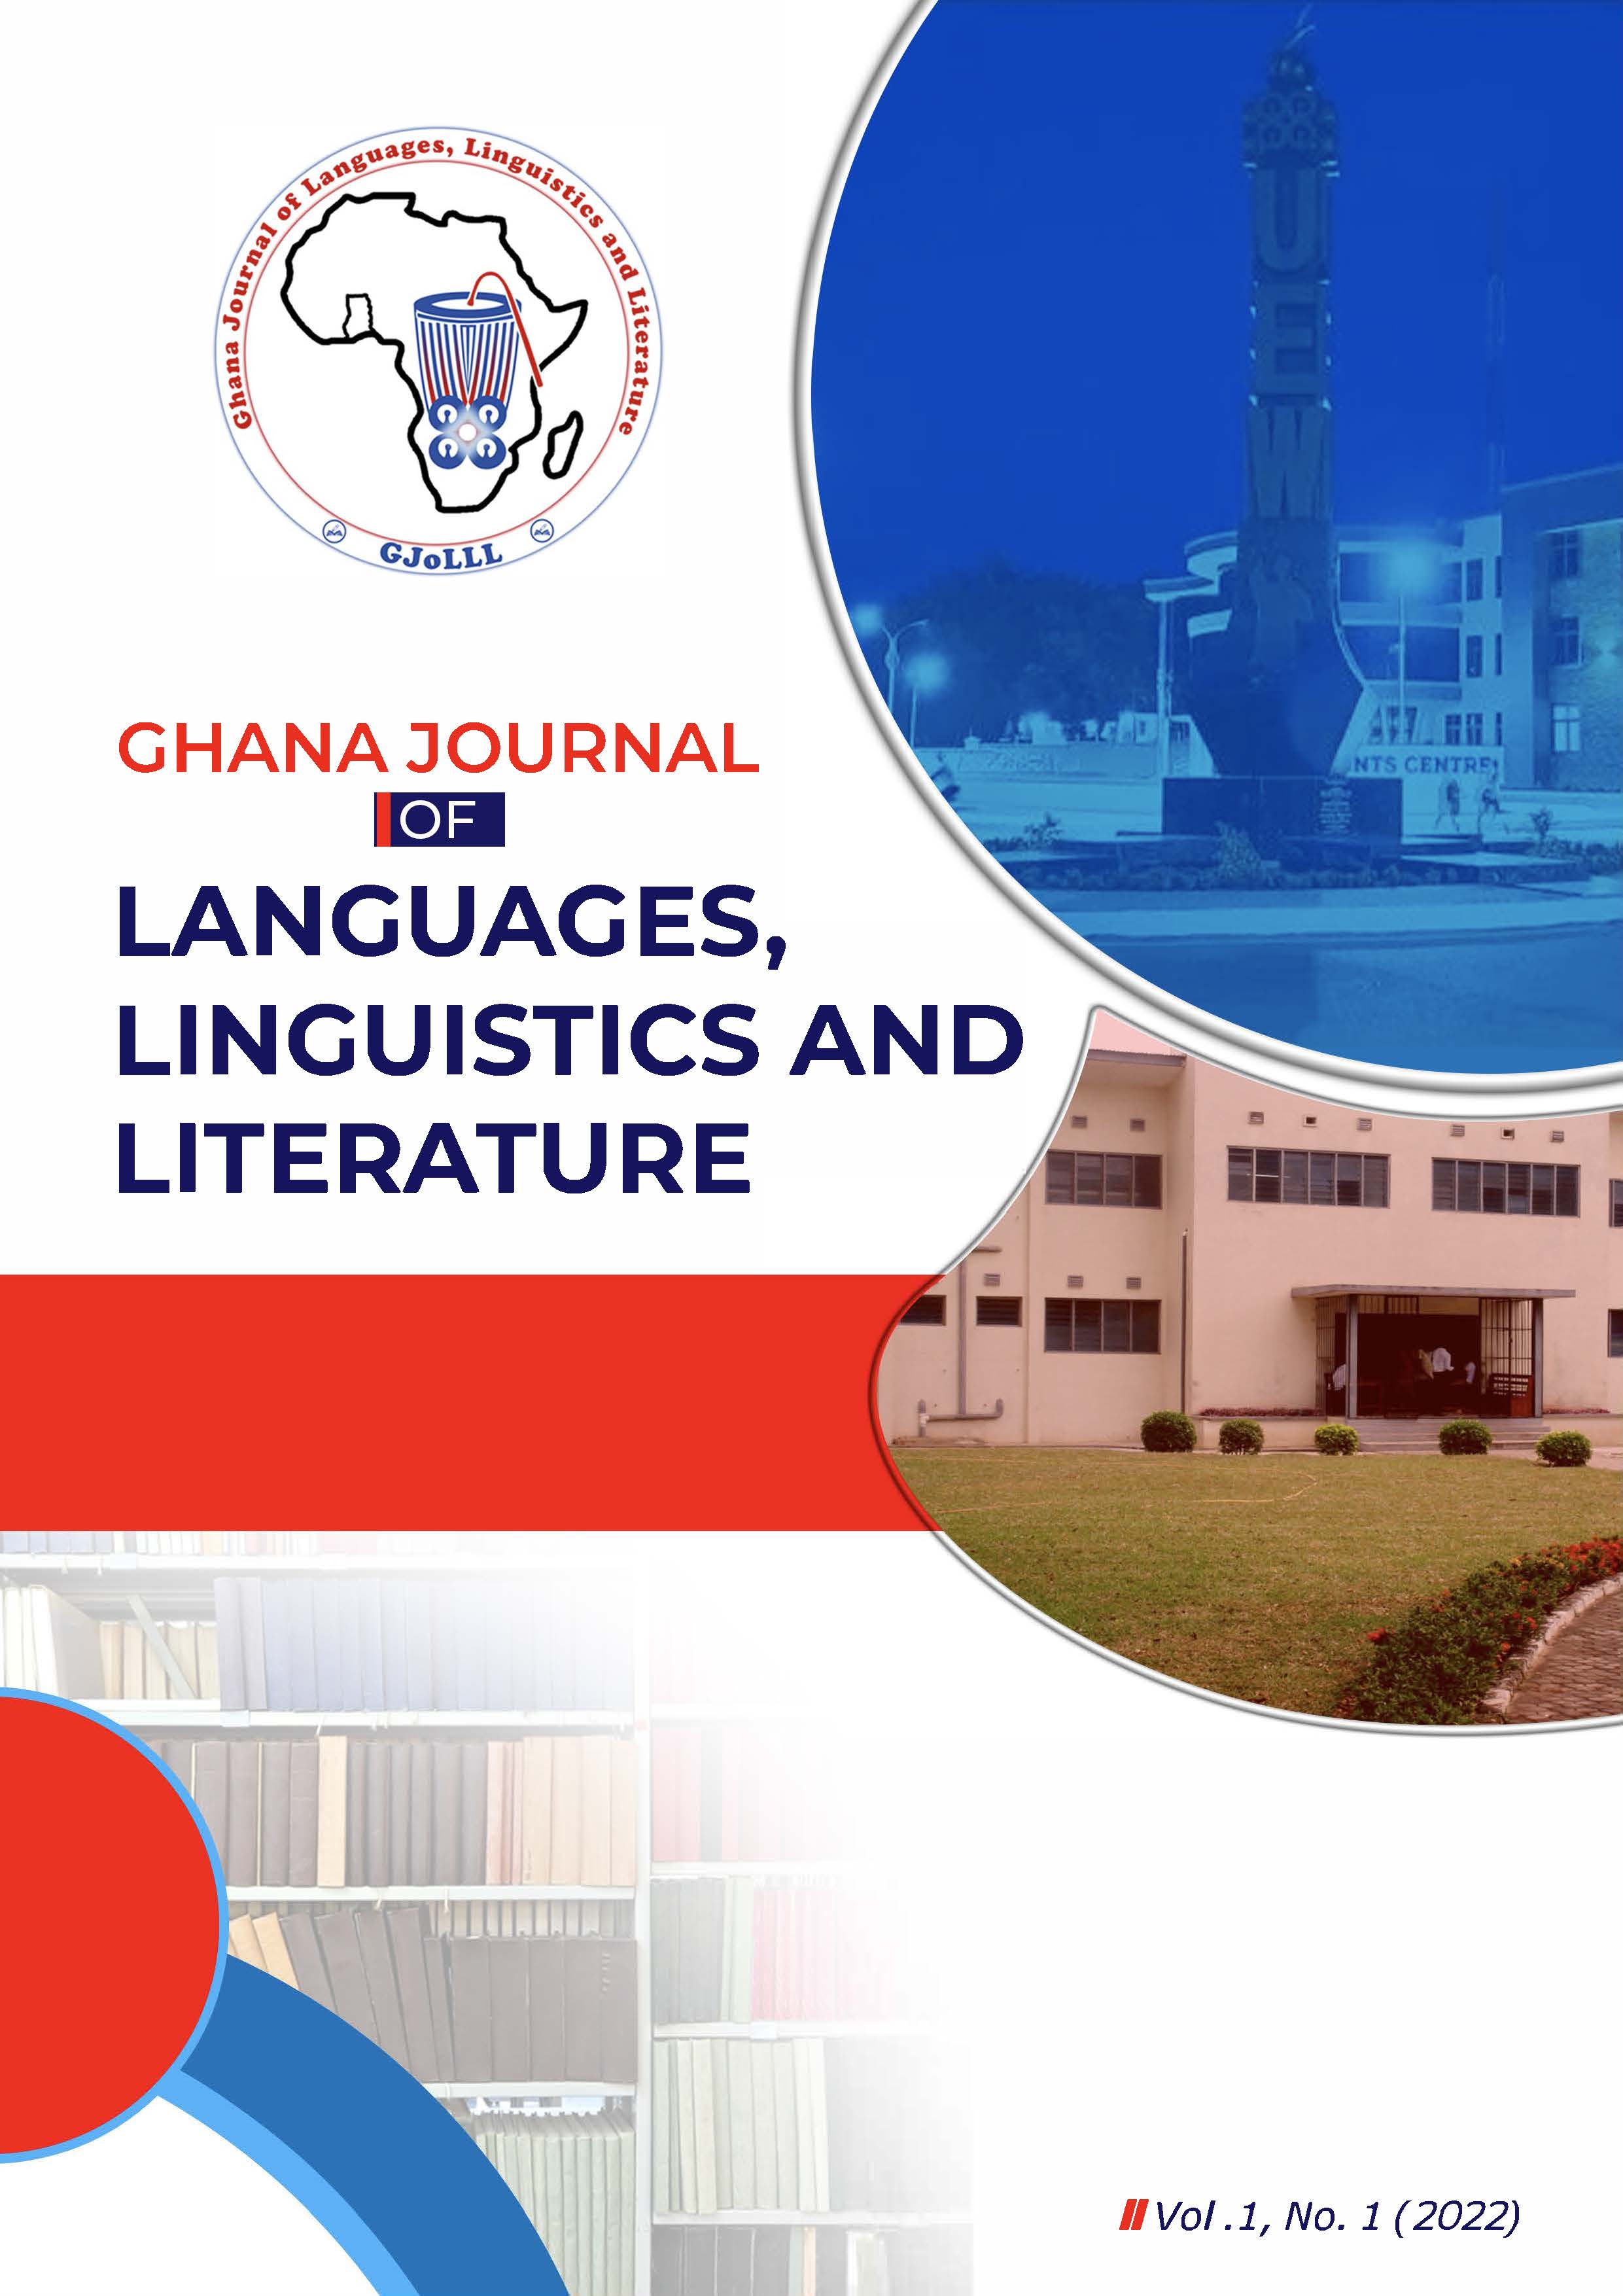 					View Vol. 1 No. 1 (2022): Ghana Journal of Languages, Linguistics and Literature (GJoLLL)
				